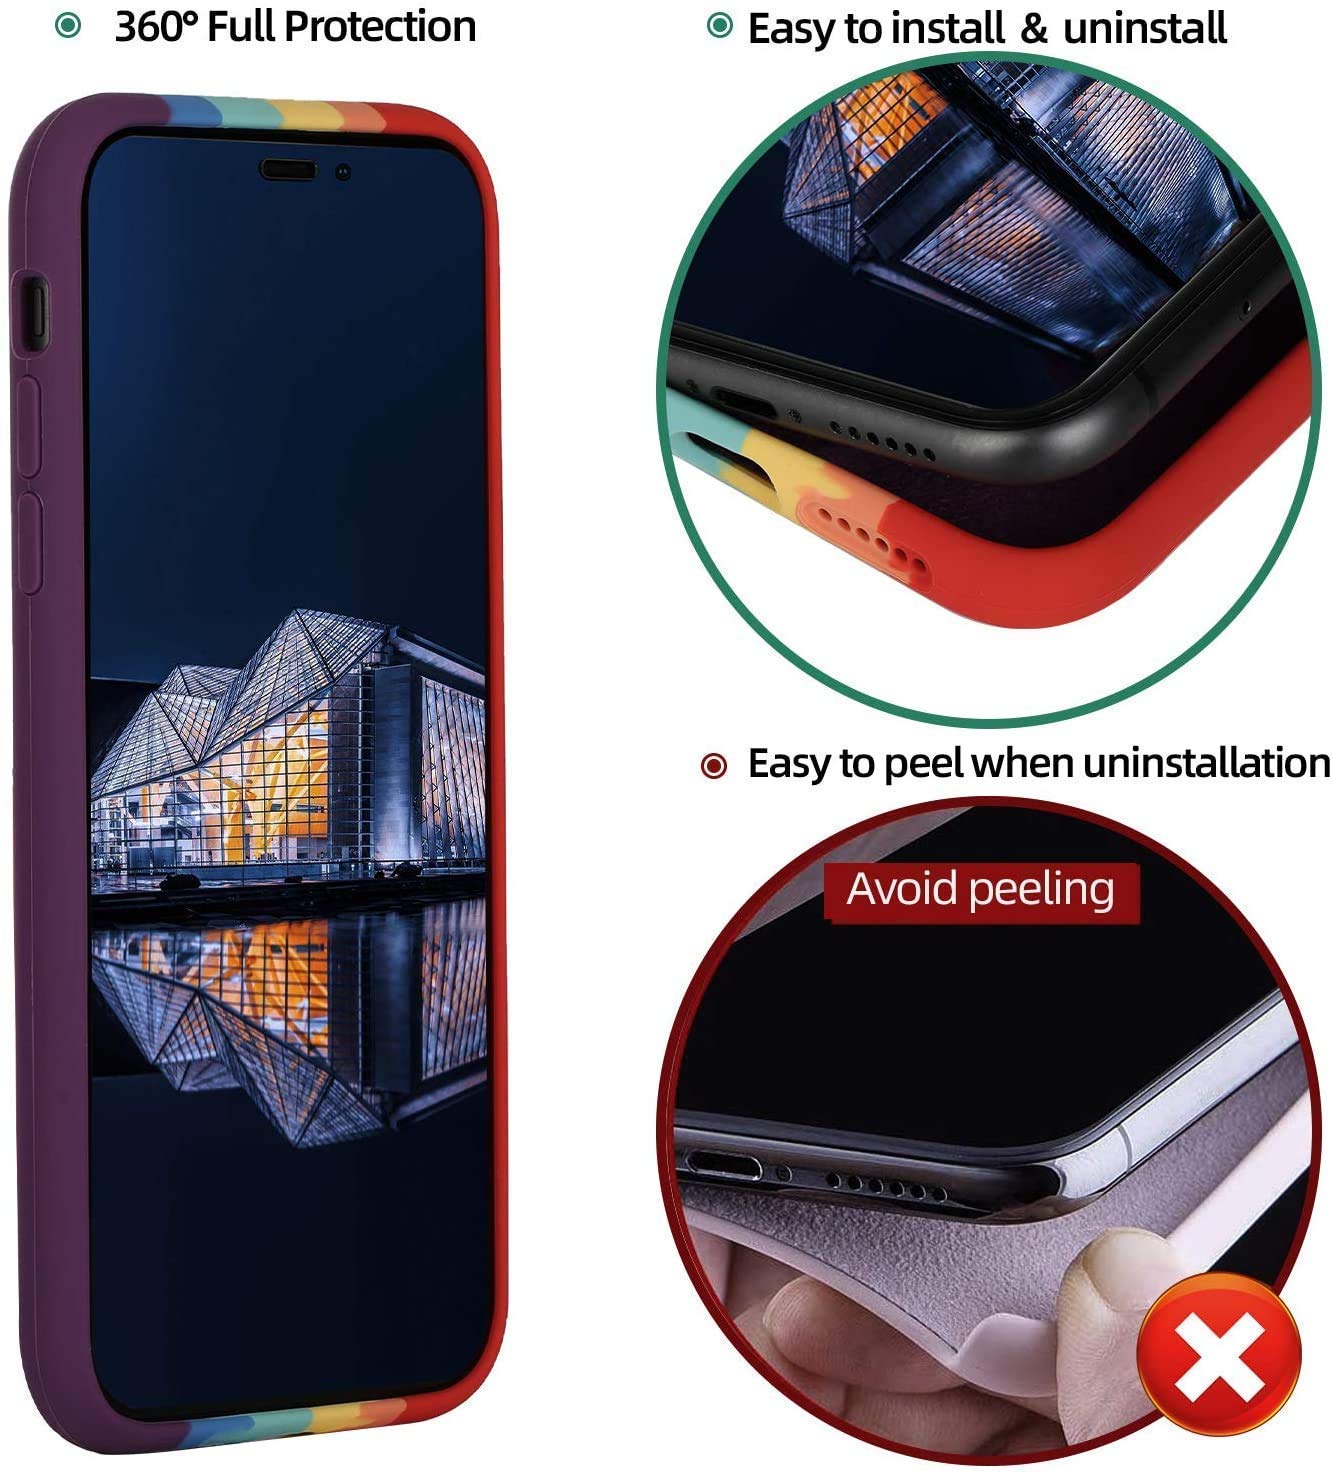 Rainbow Soft Silicon Case For iPhone 11 Pro Max